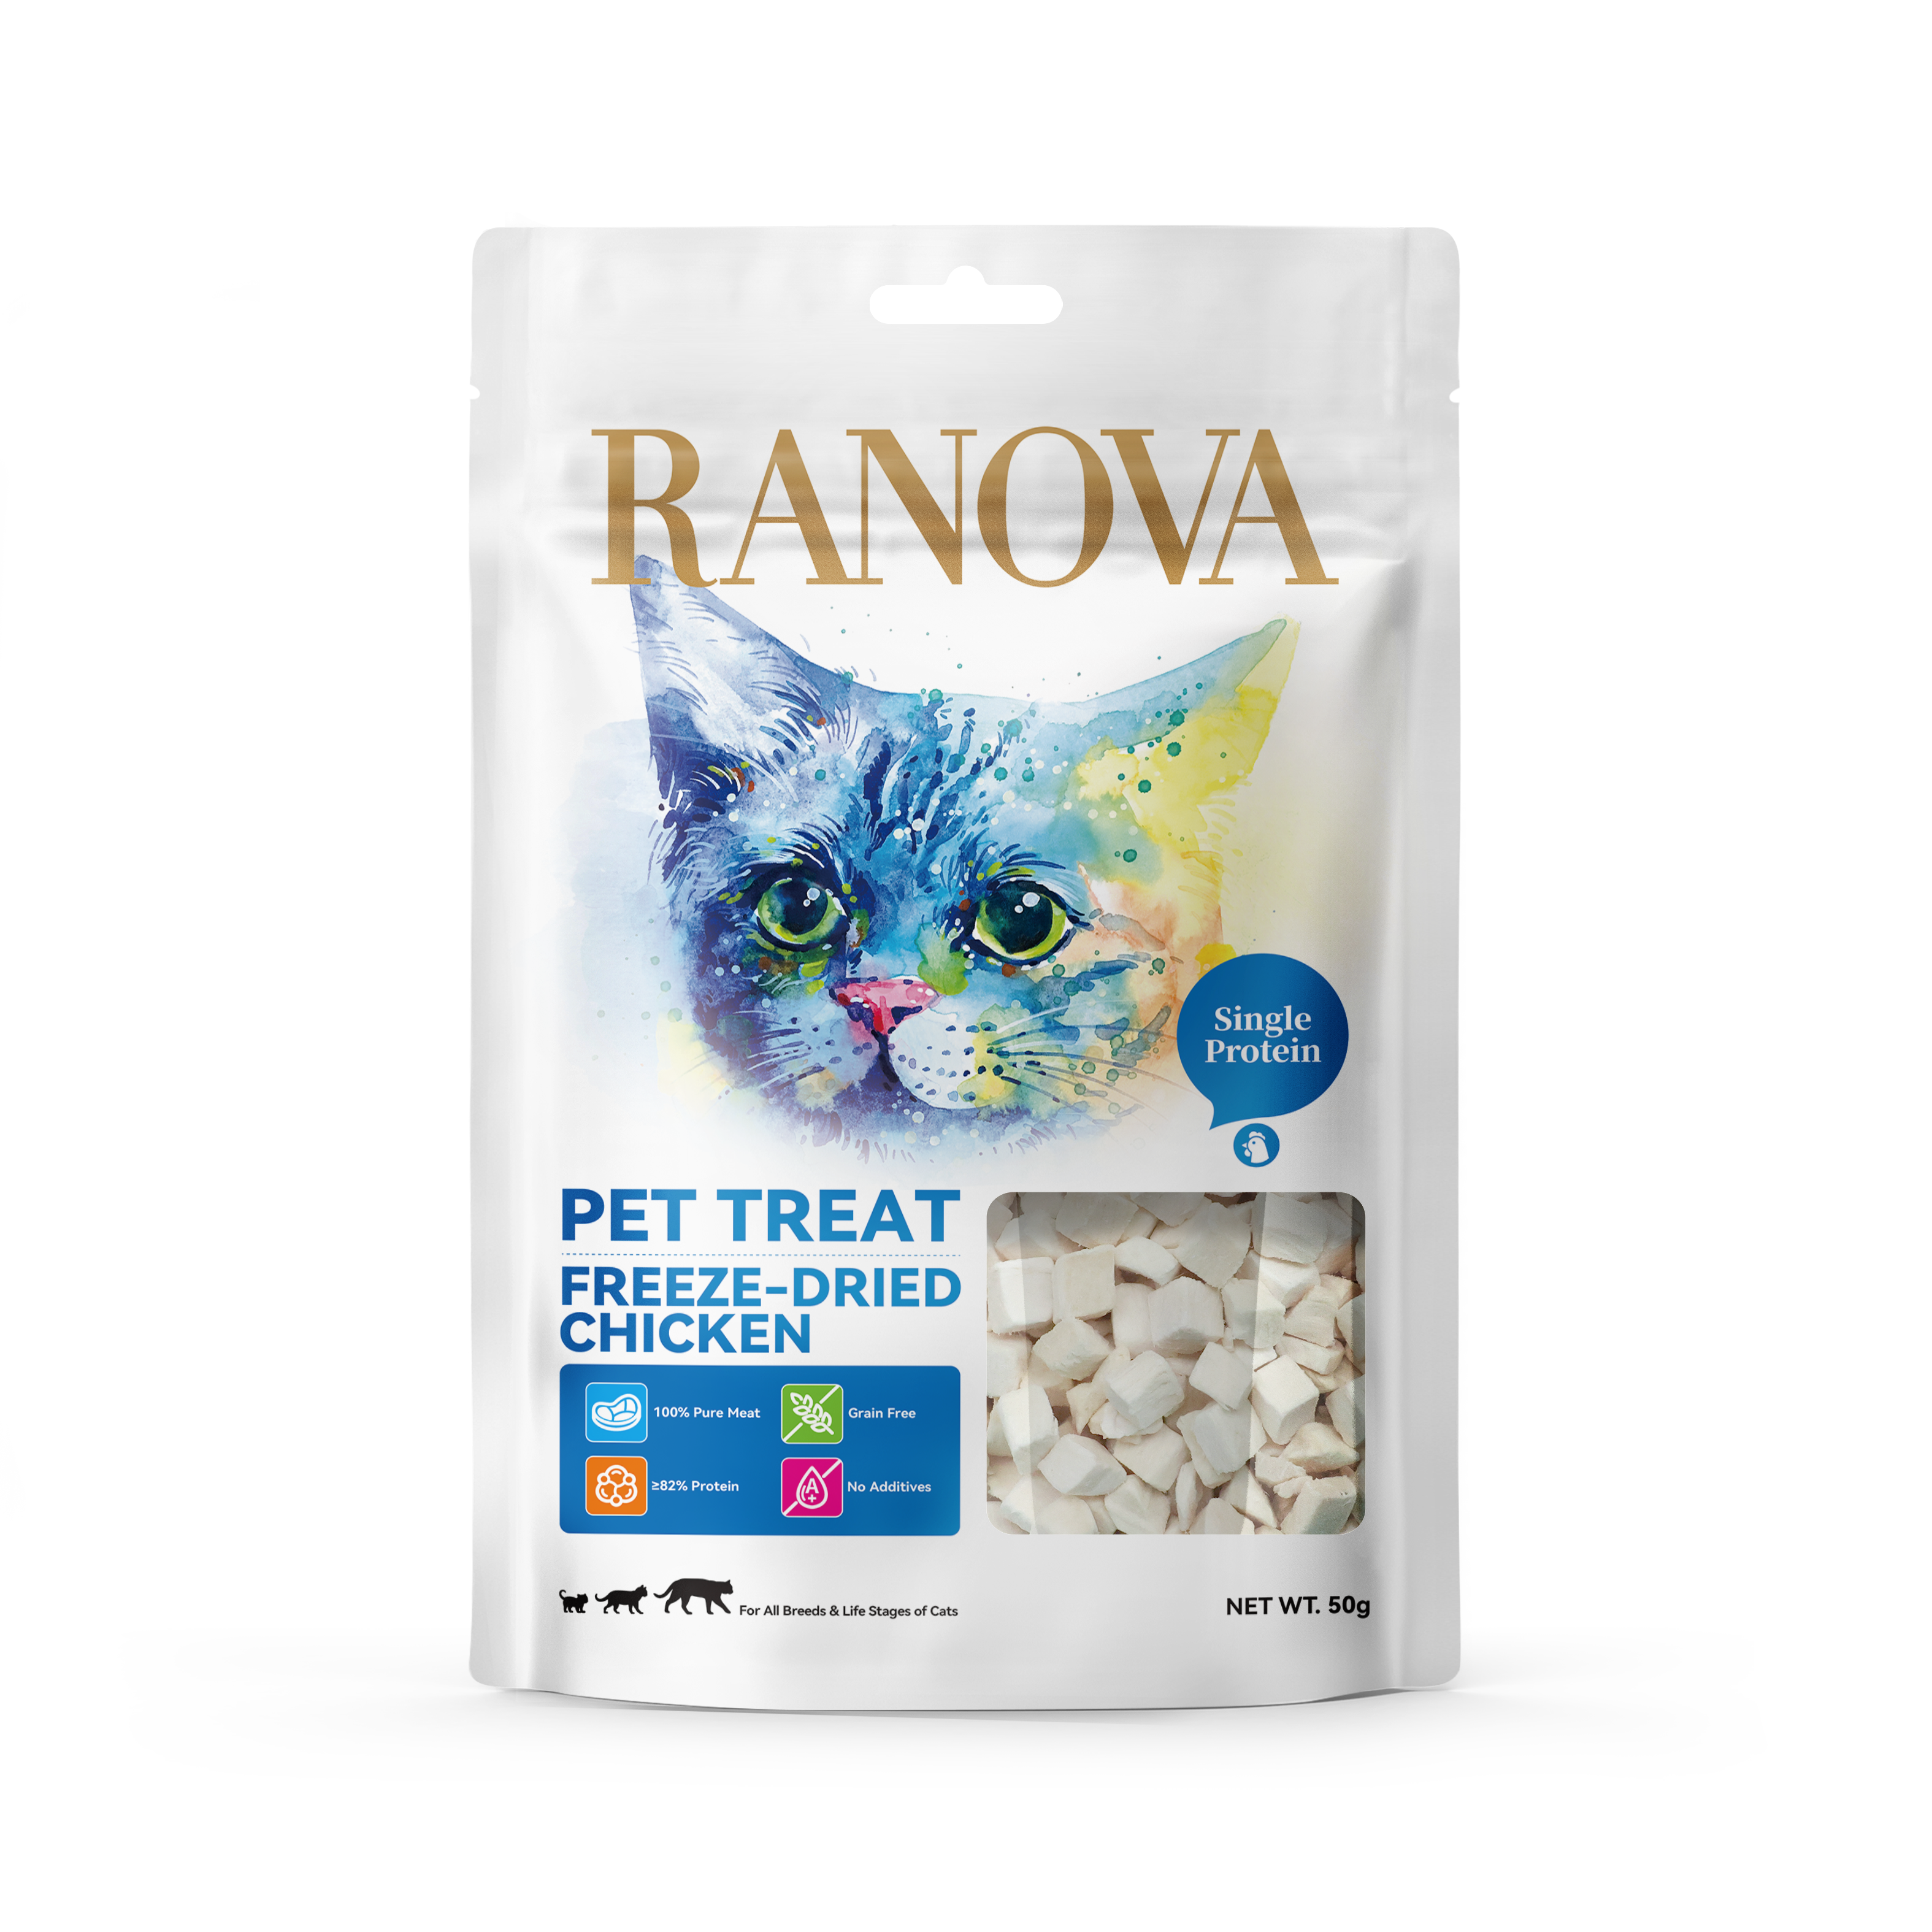 Ranova Freeze Dried Chicken for cats - 5g